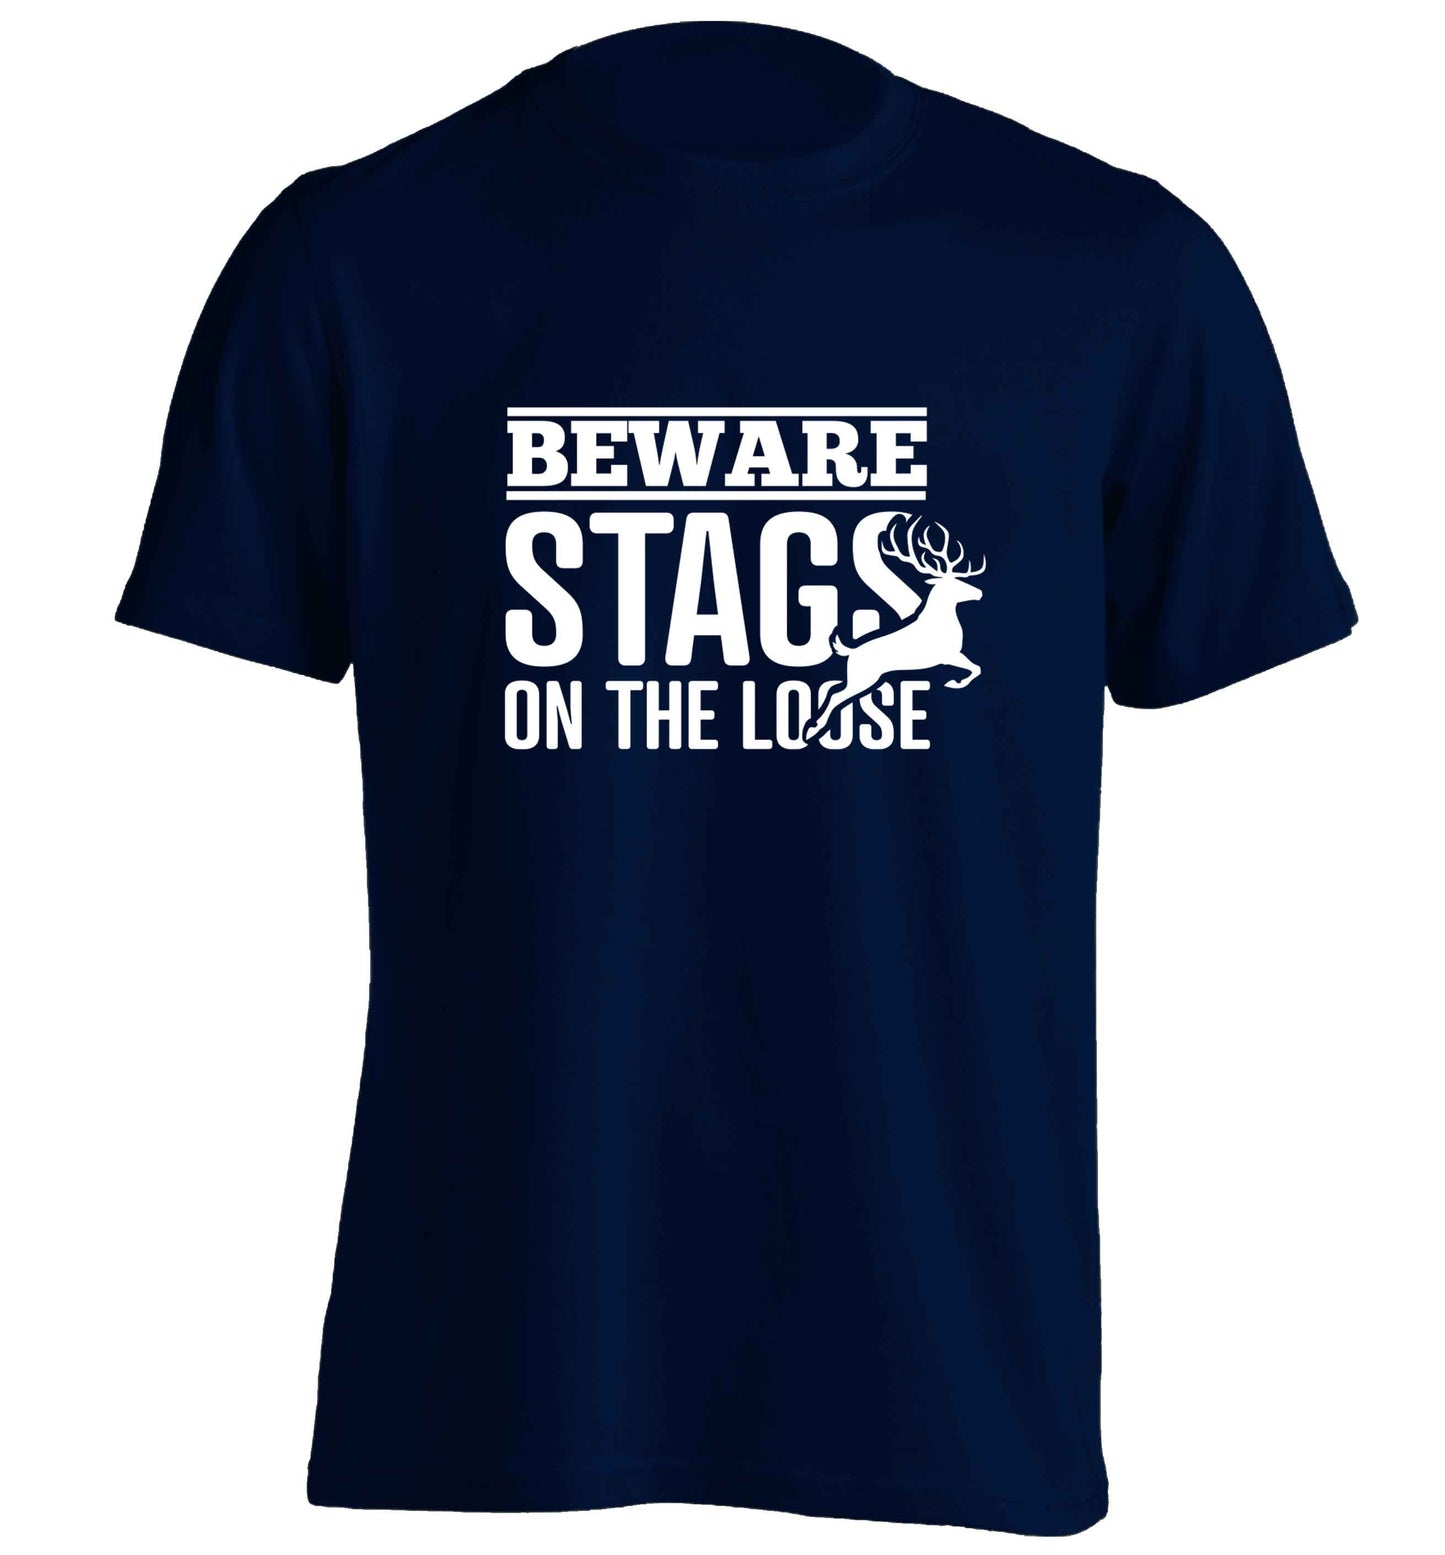 Beware stags on the loose adults unisex navy Tshirt 2XL